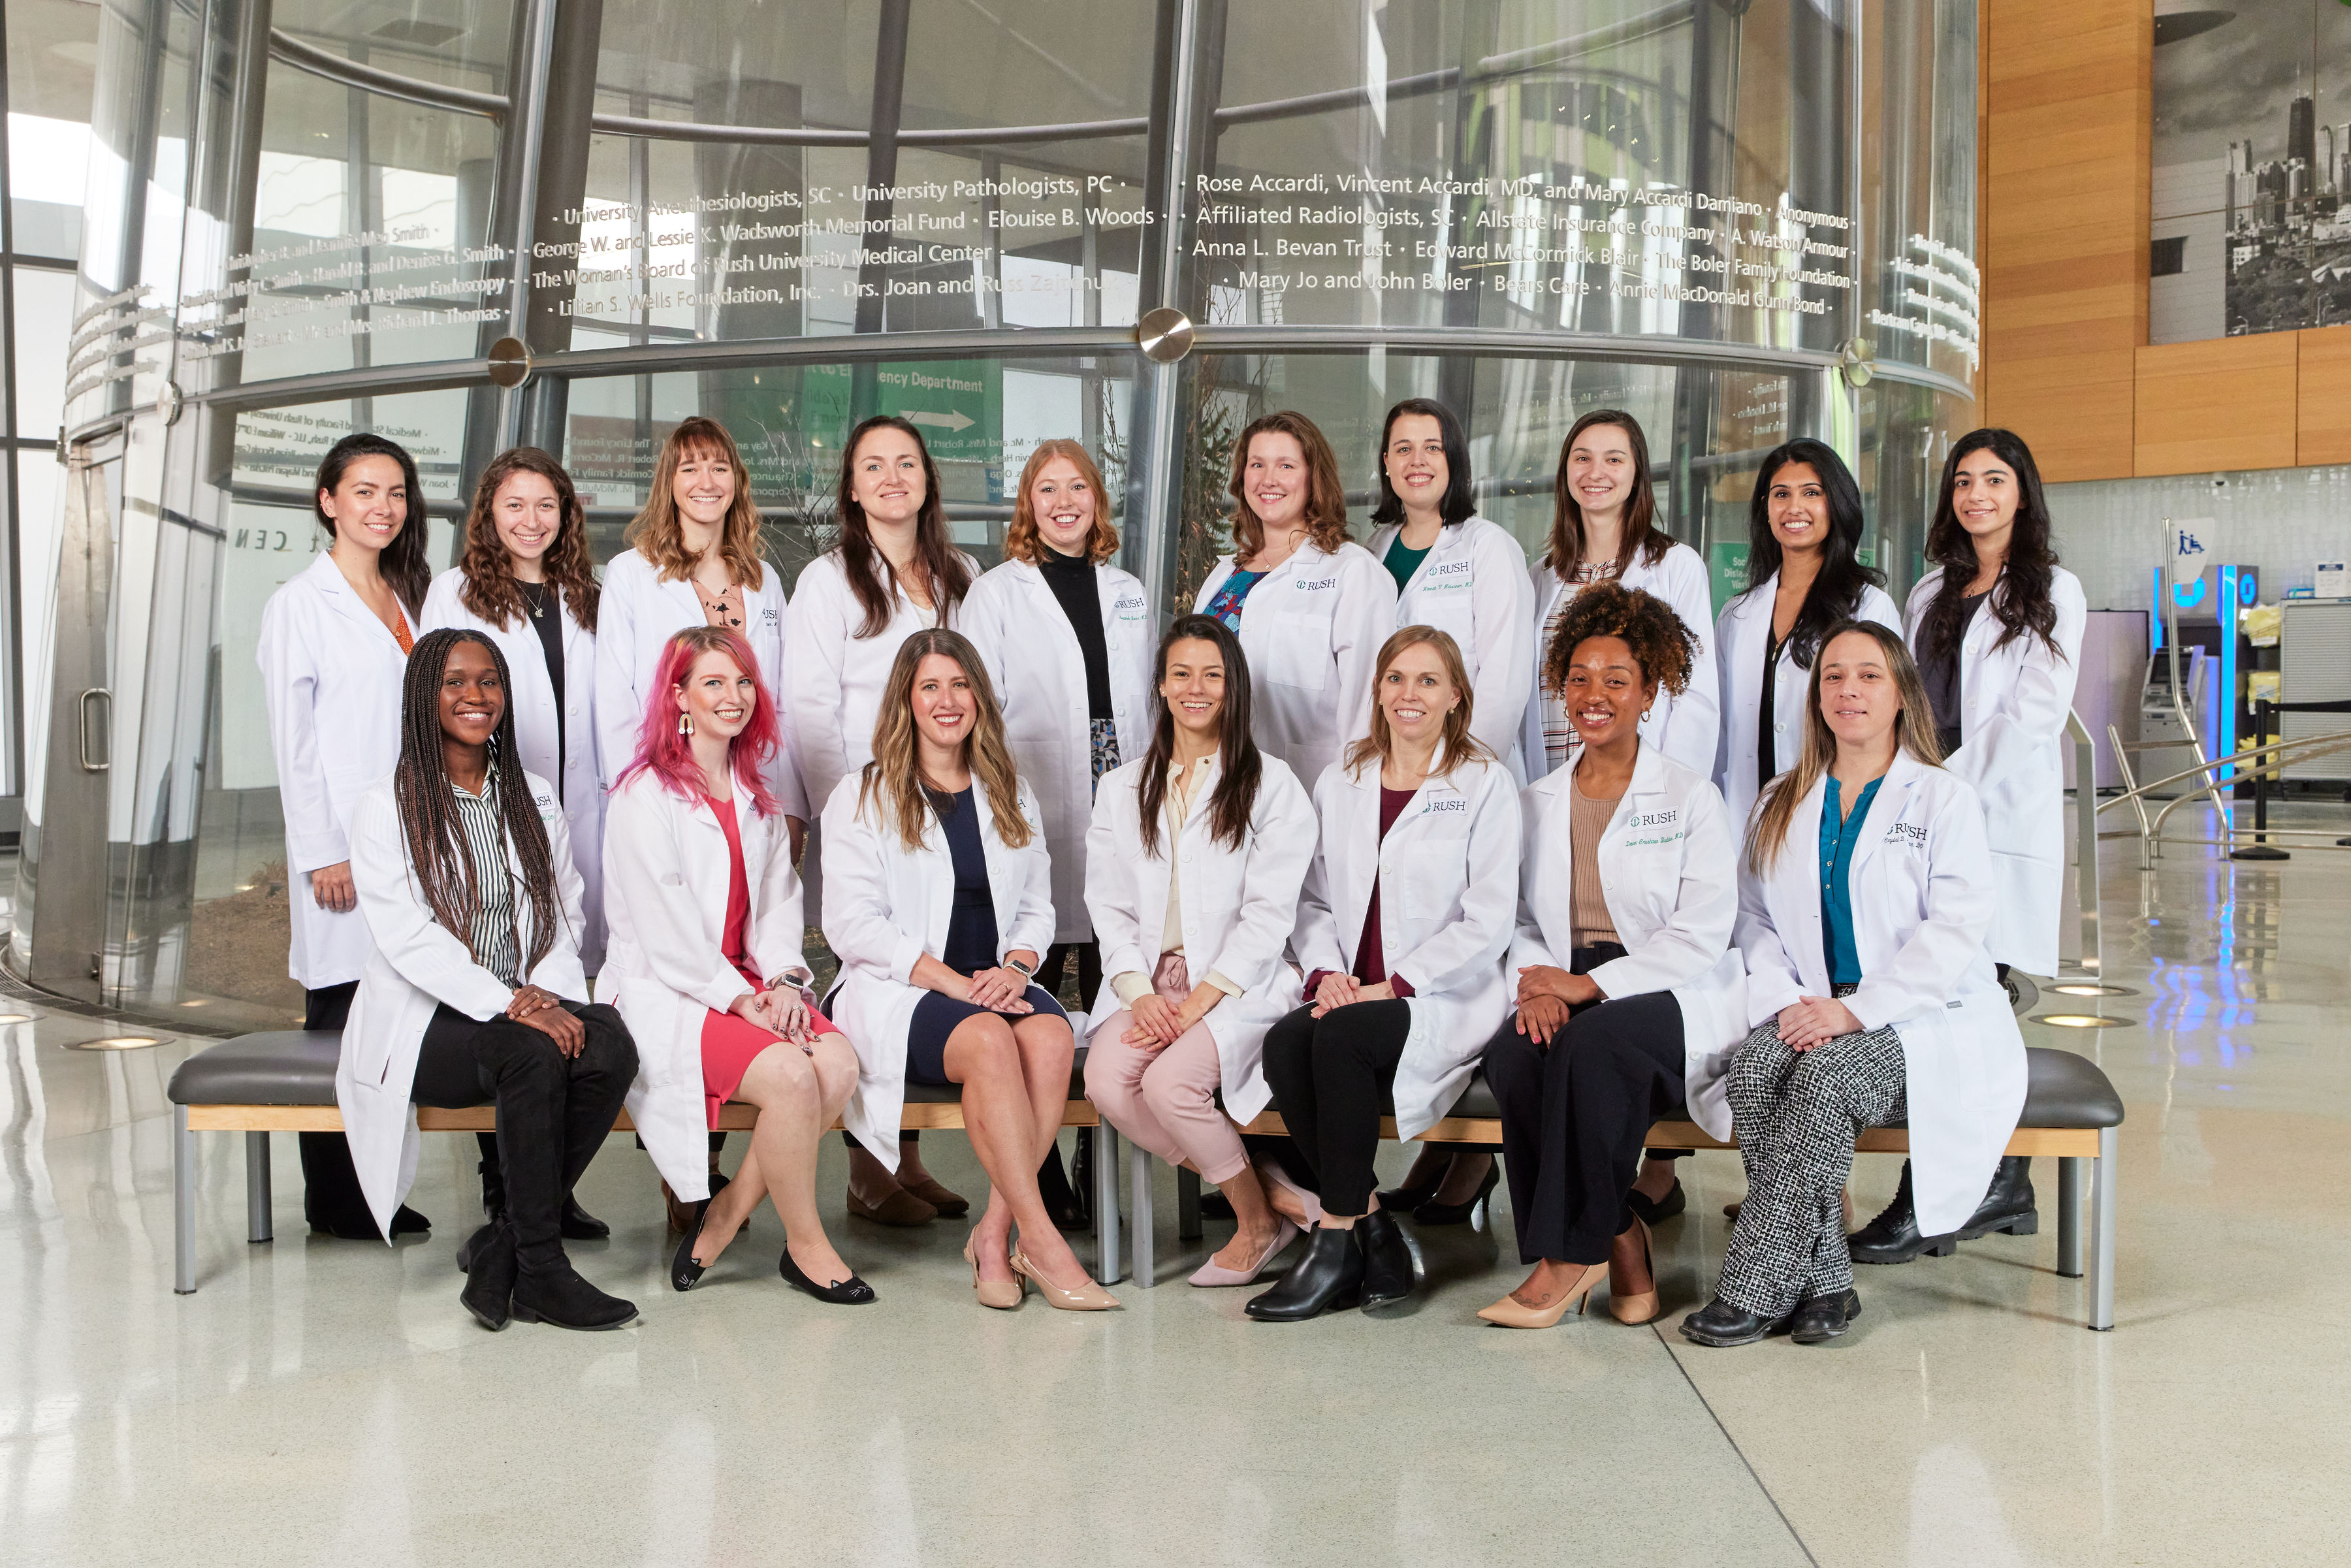 An all-women group of residents stand together in the RUSH University Medical Center Atrium.